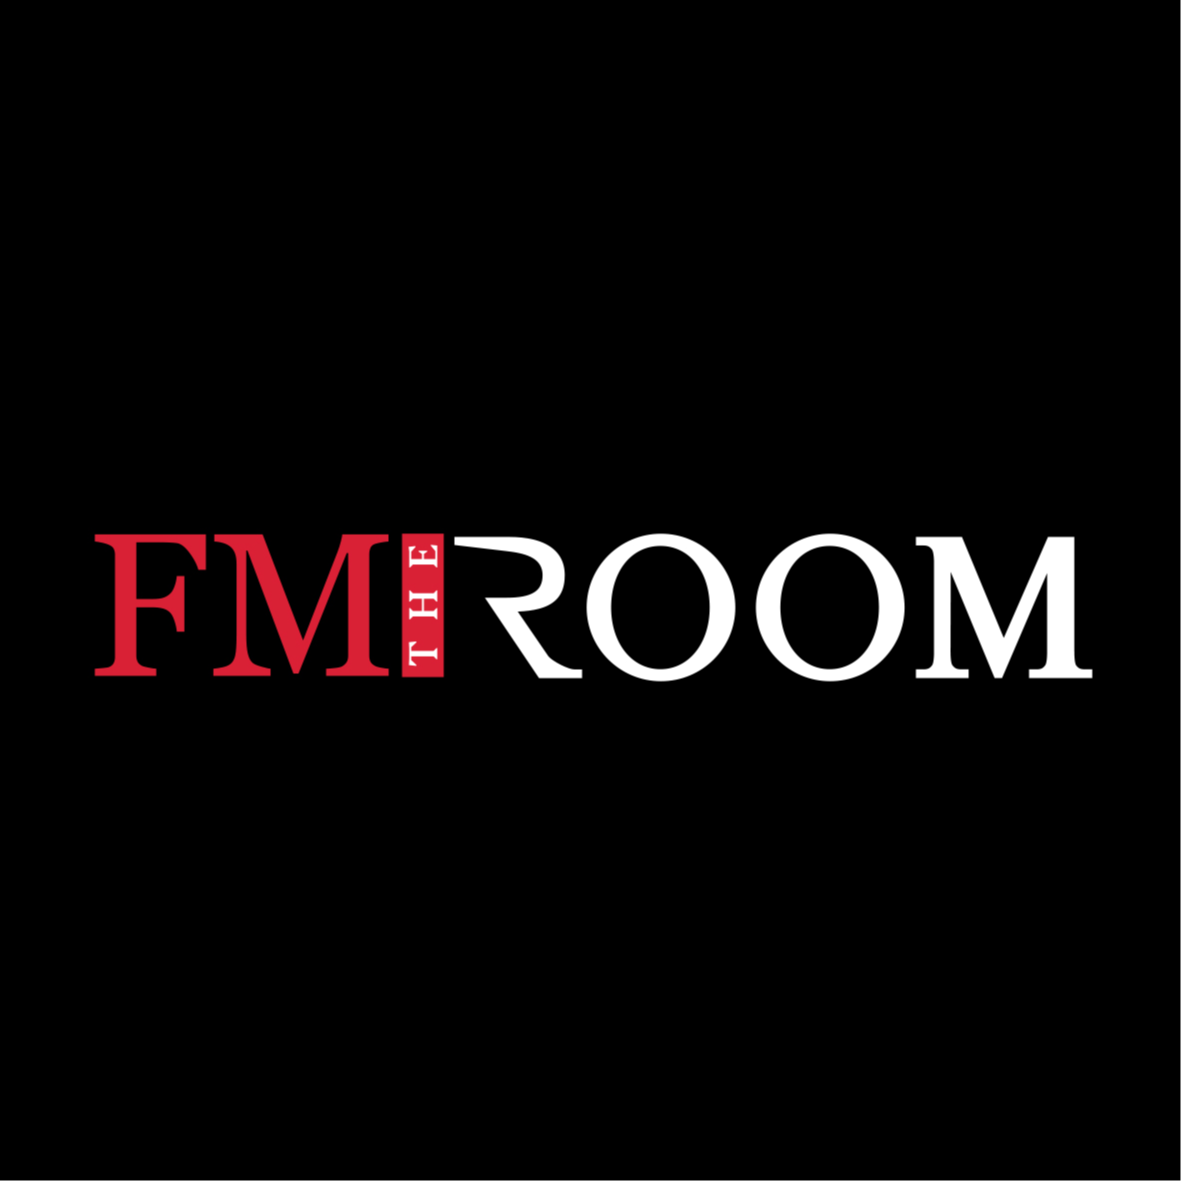 The RoomFM